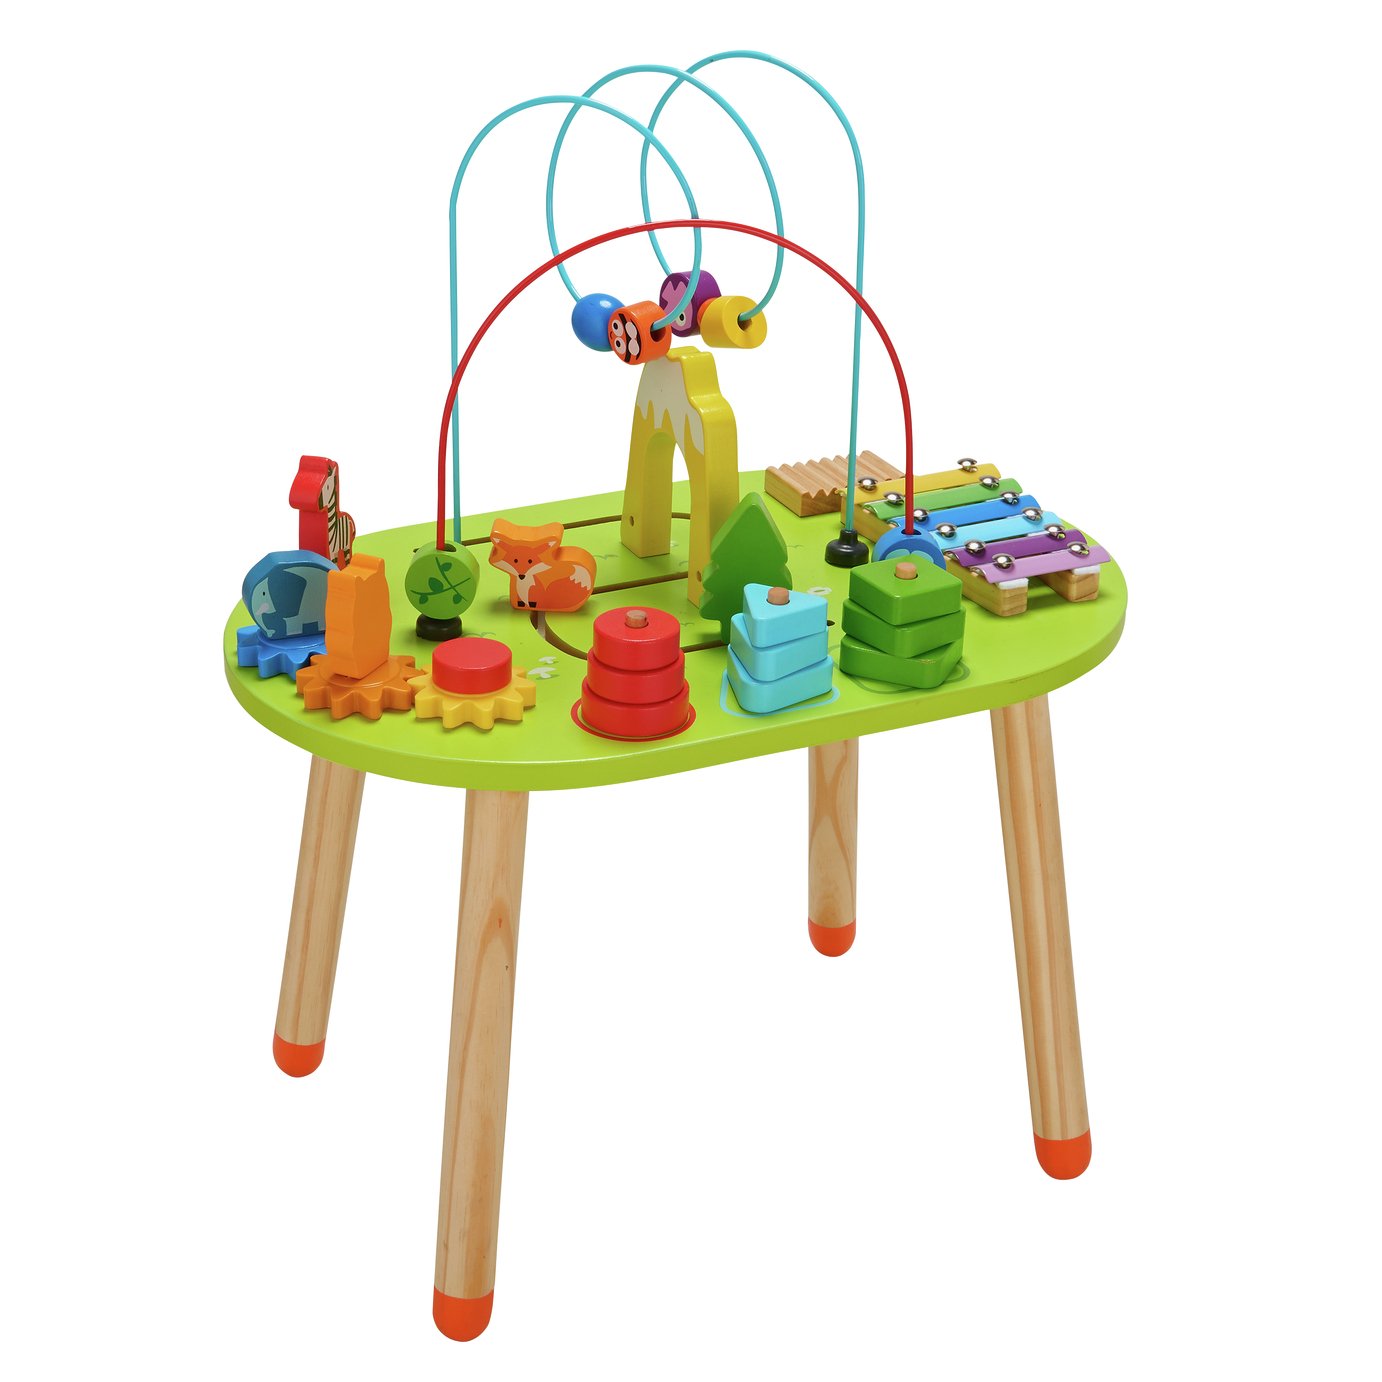 Chad Valley Wooden Activity Table